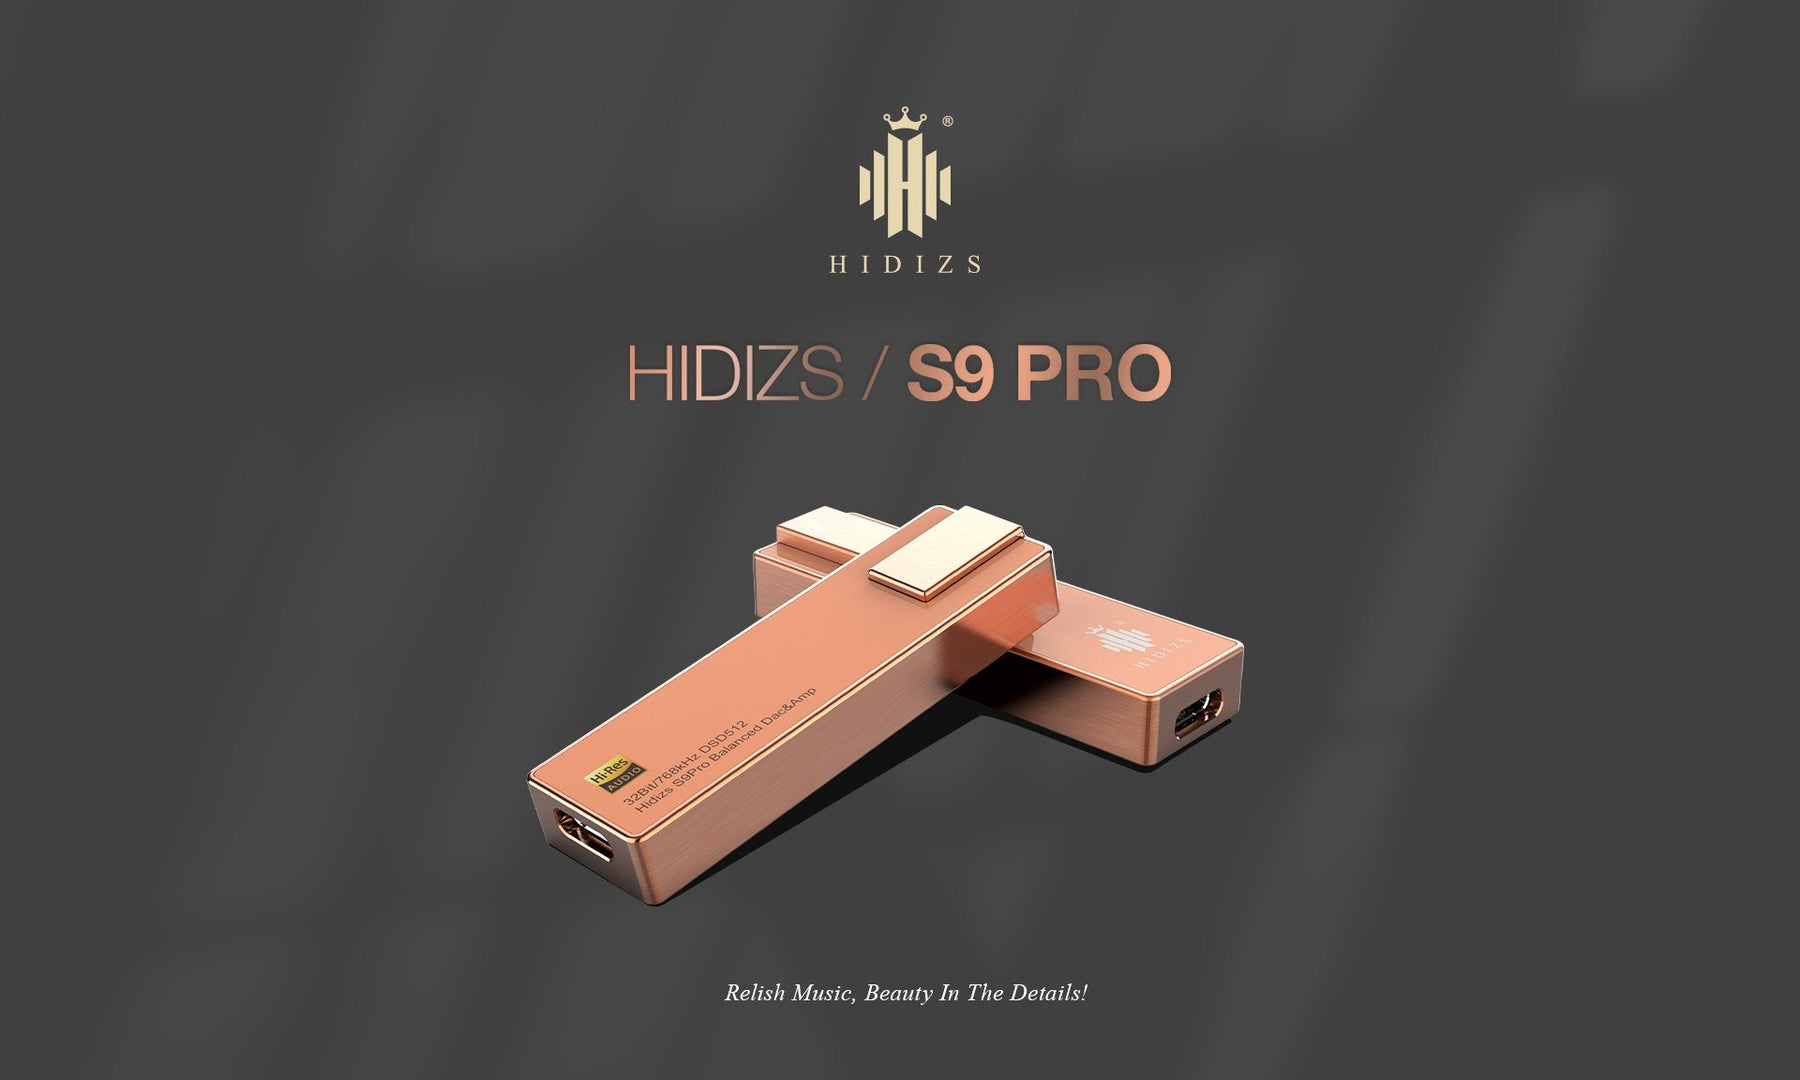 Hidizs S9 Pro Red Copper Limited Edition Announced: Only 500 Units Made Available Worldwide